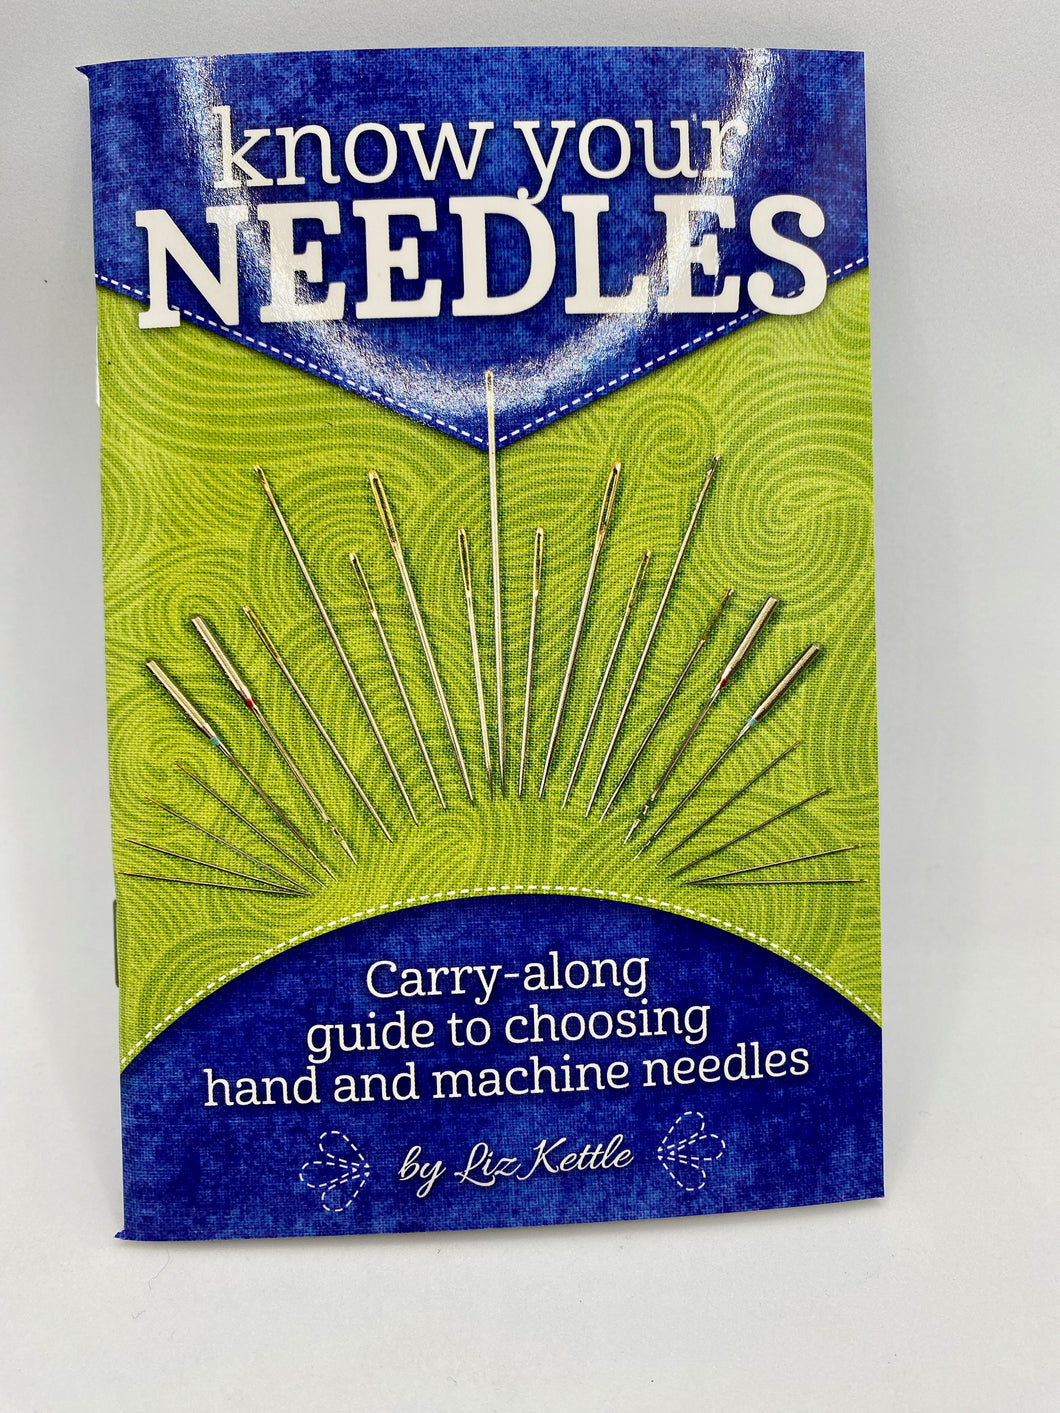 Know Your Needles: carry-along guide to choosing hand and machine needles by Liz Kettle